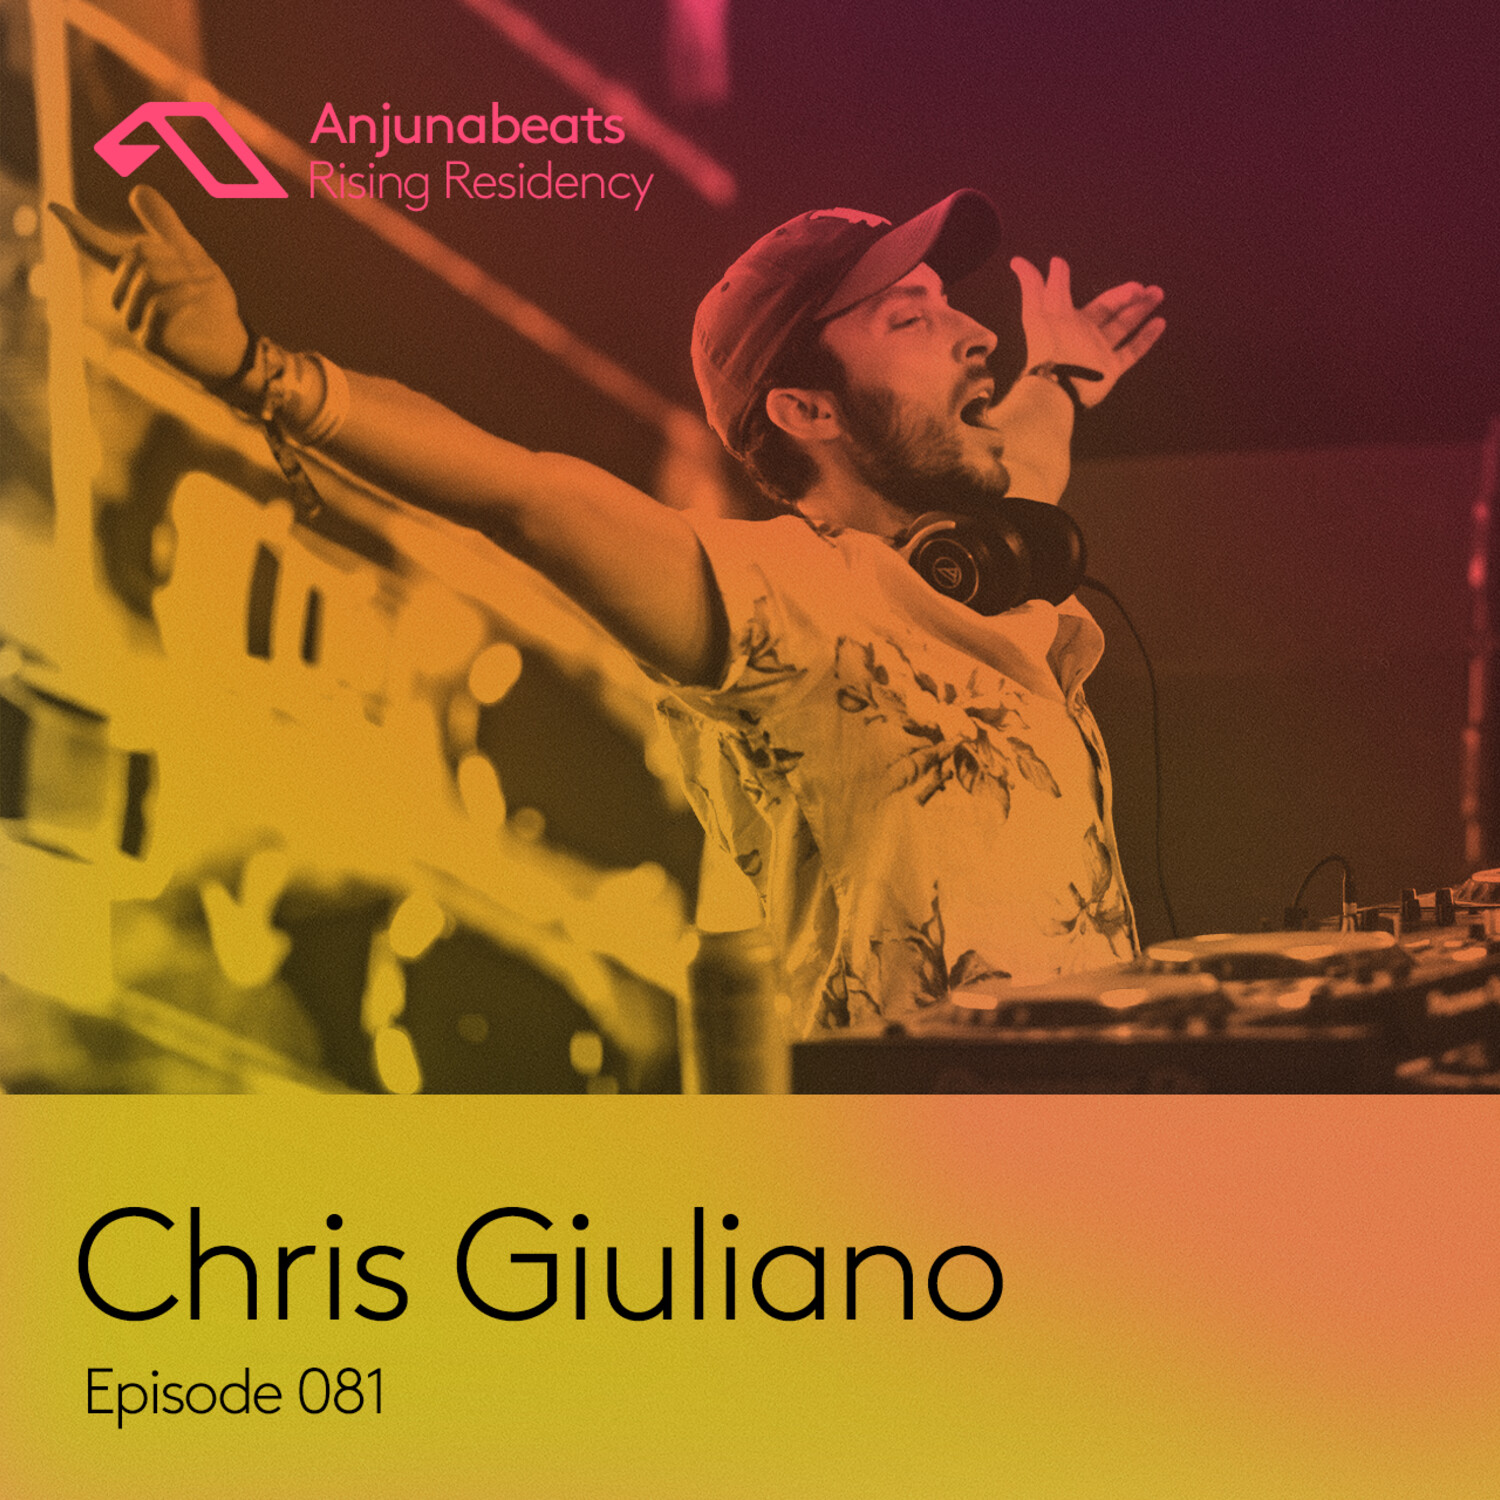 The Anjunabeats Rising Residency 081 with Chris Giuliano